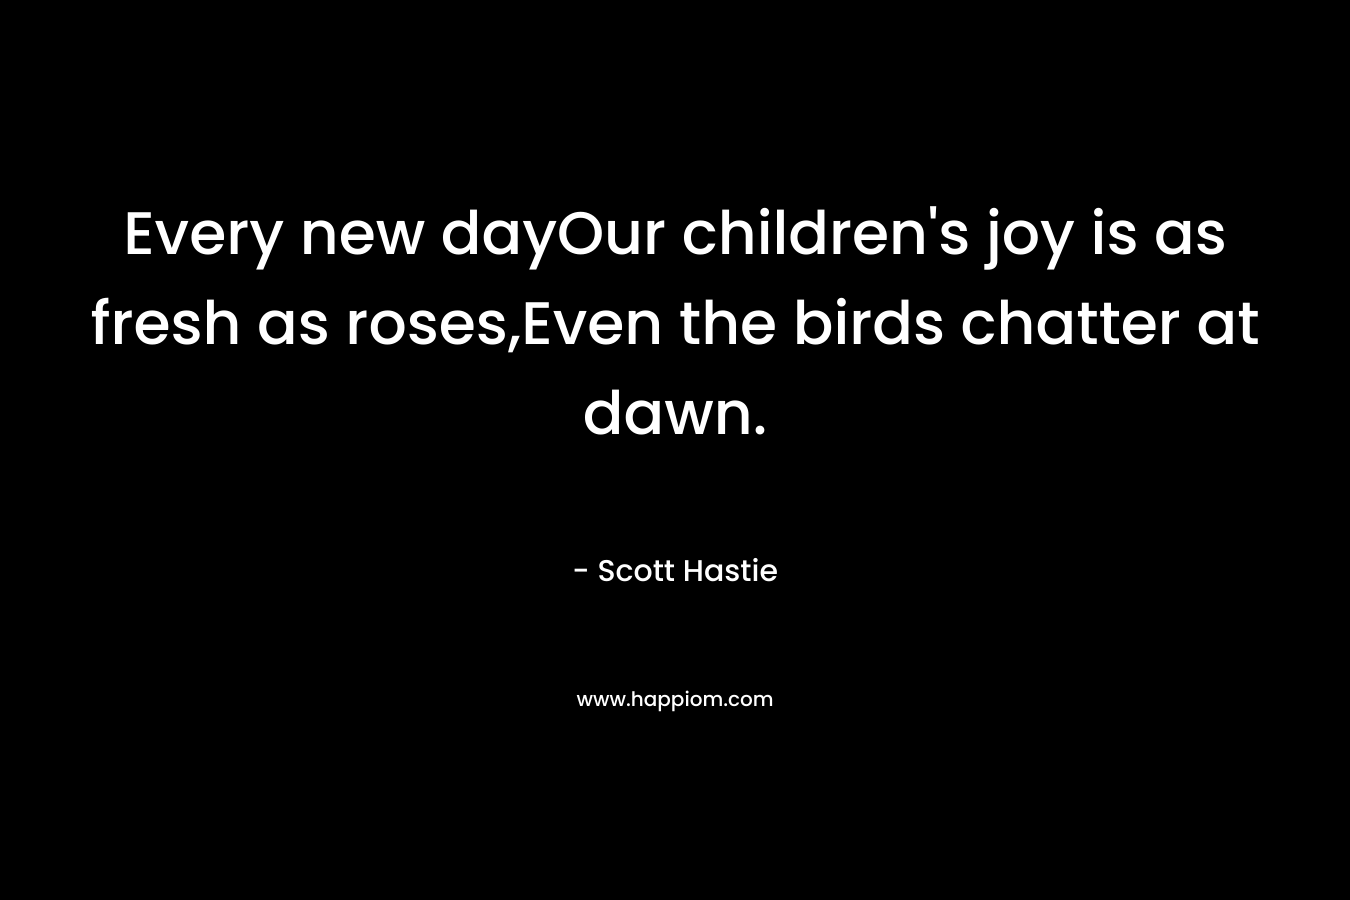 Every new dayOur children's joy is as fresh as roses,Even the birds chatter at dawn.